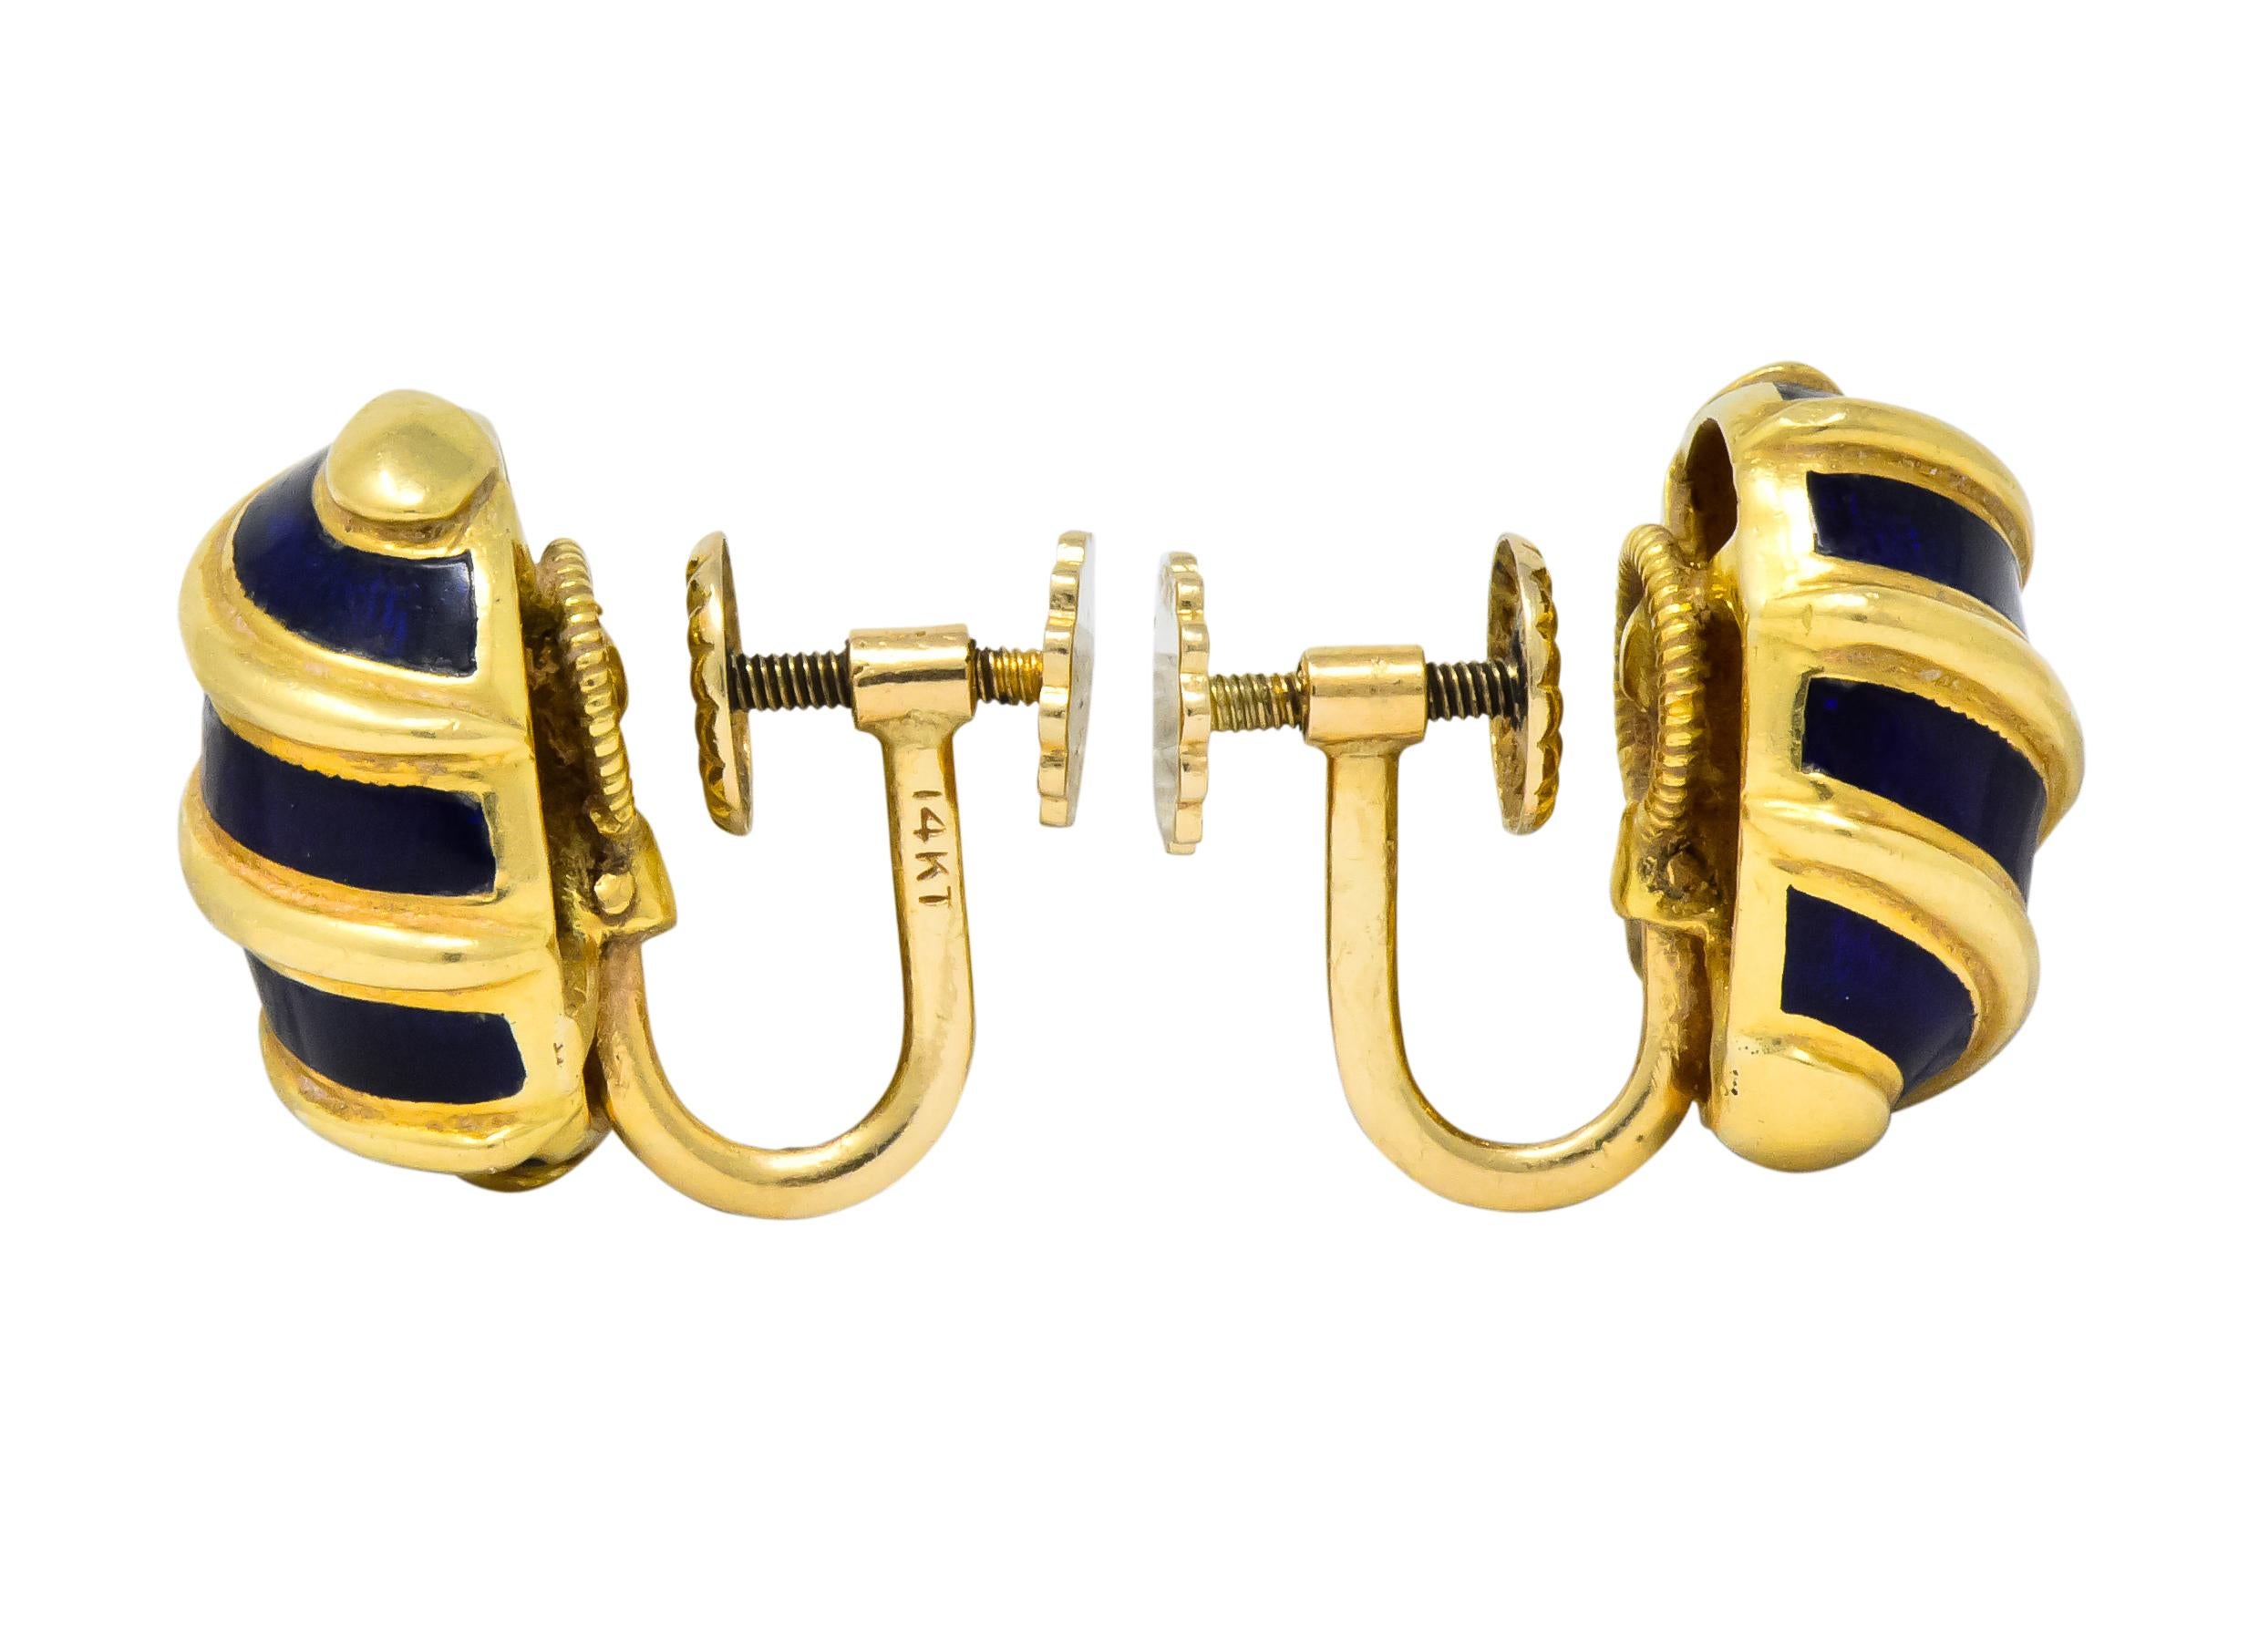 Featuring oval domed gold with deep cobalt blue enamel and ribbed accents

Schlumberger renowned for enamel upon gold technique

Verso of dome signed Tiffany Schlumberger 18k

Circa 1960's

Later added screwback findings marked 14k

Measures 5/8 x